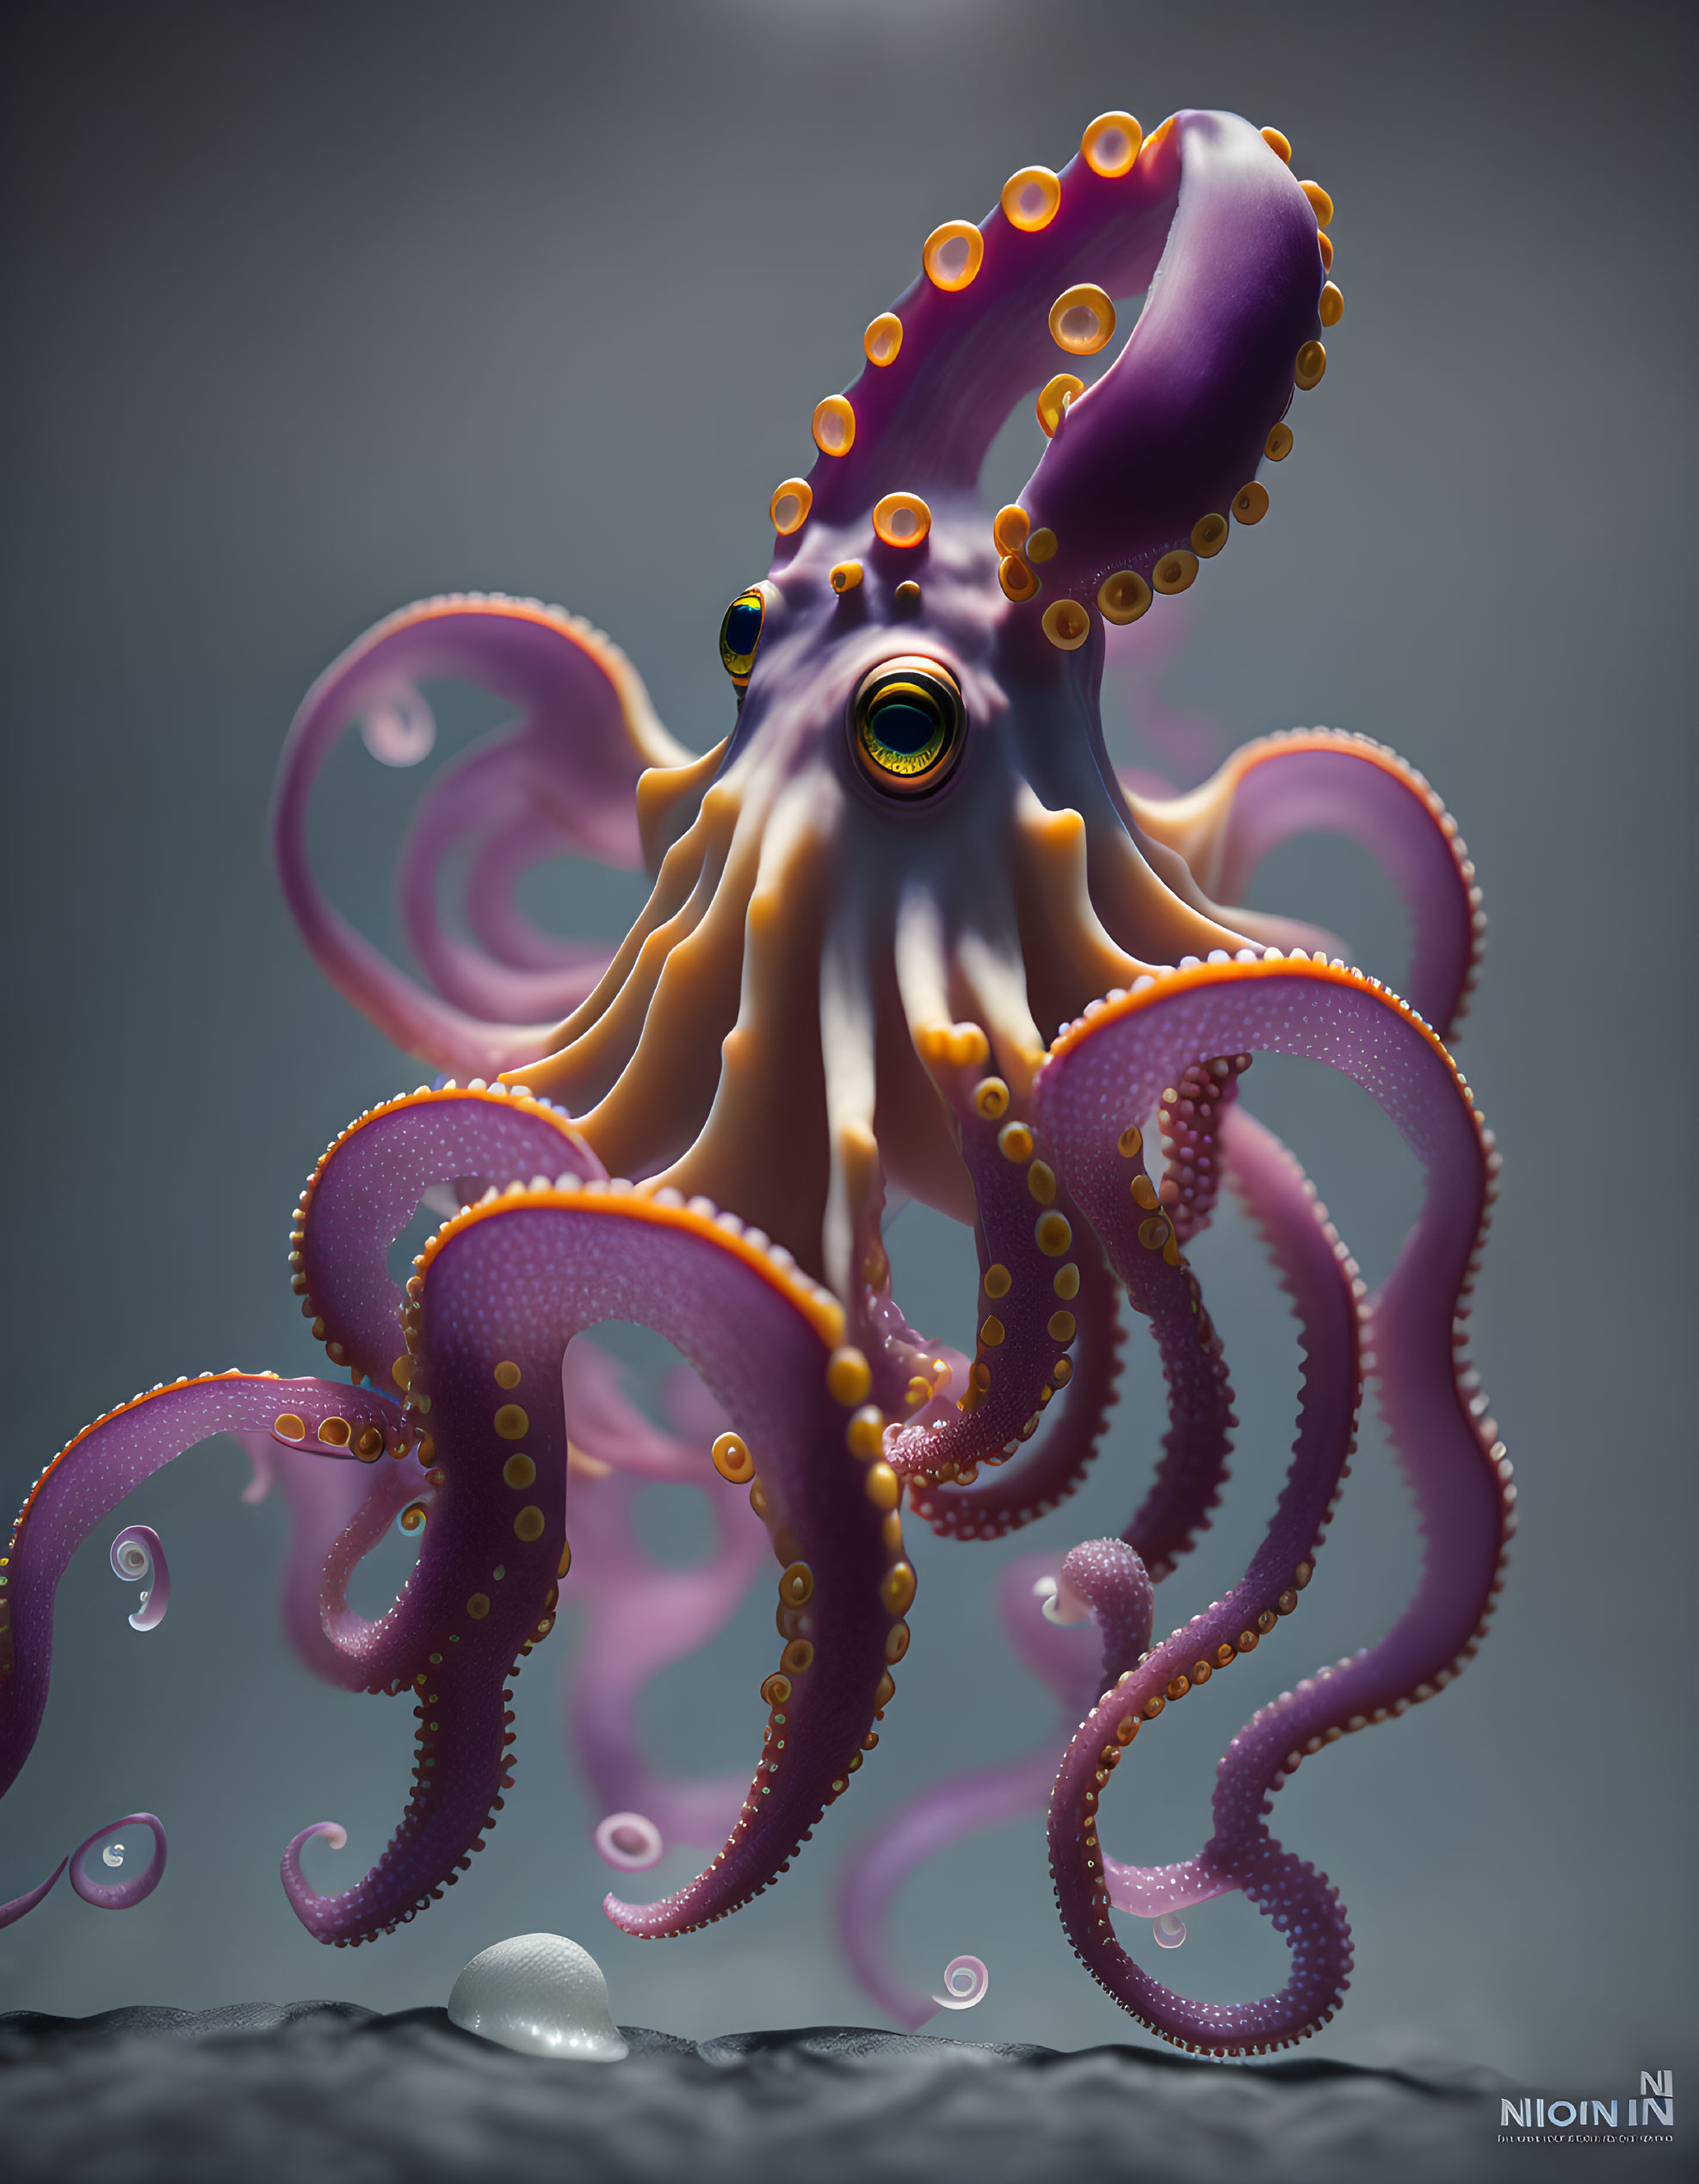 Colorful Octopus with Expressive Eyes and Tentacles in Realistic Art Style